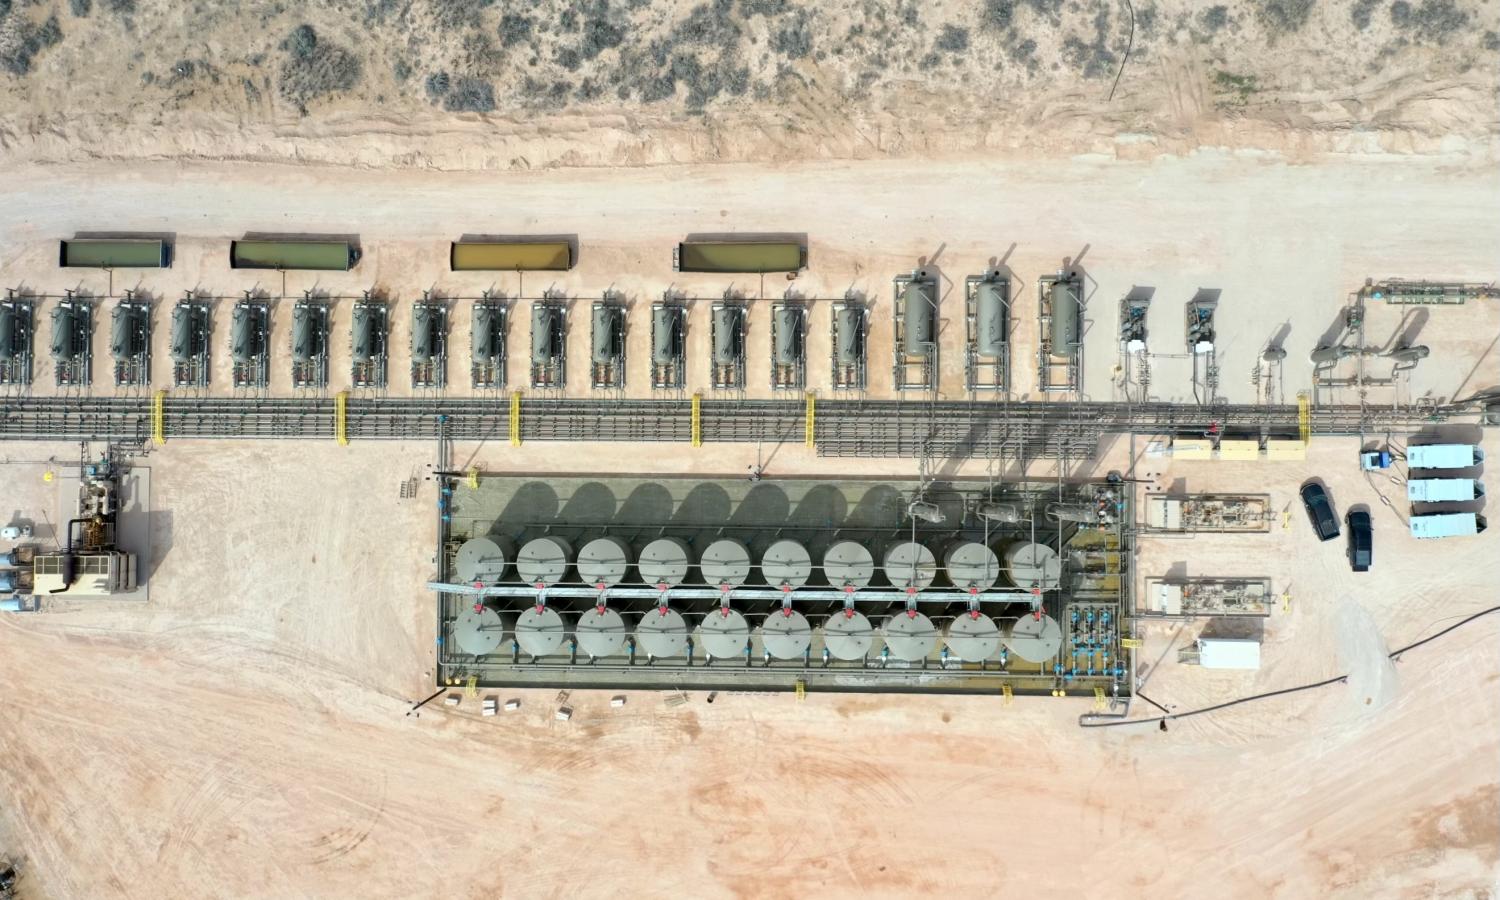 Drone photo of the 15-well Ovation central tank battery